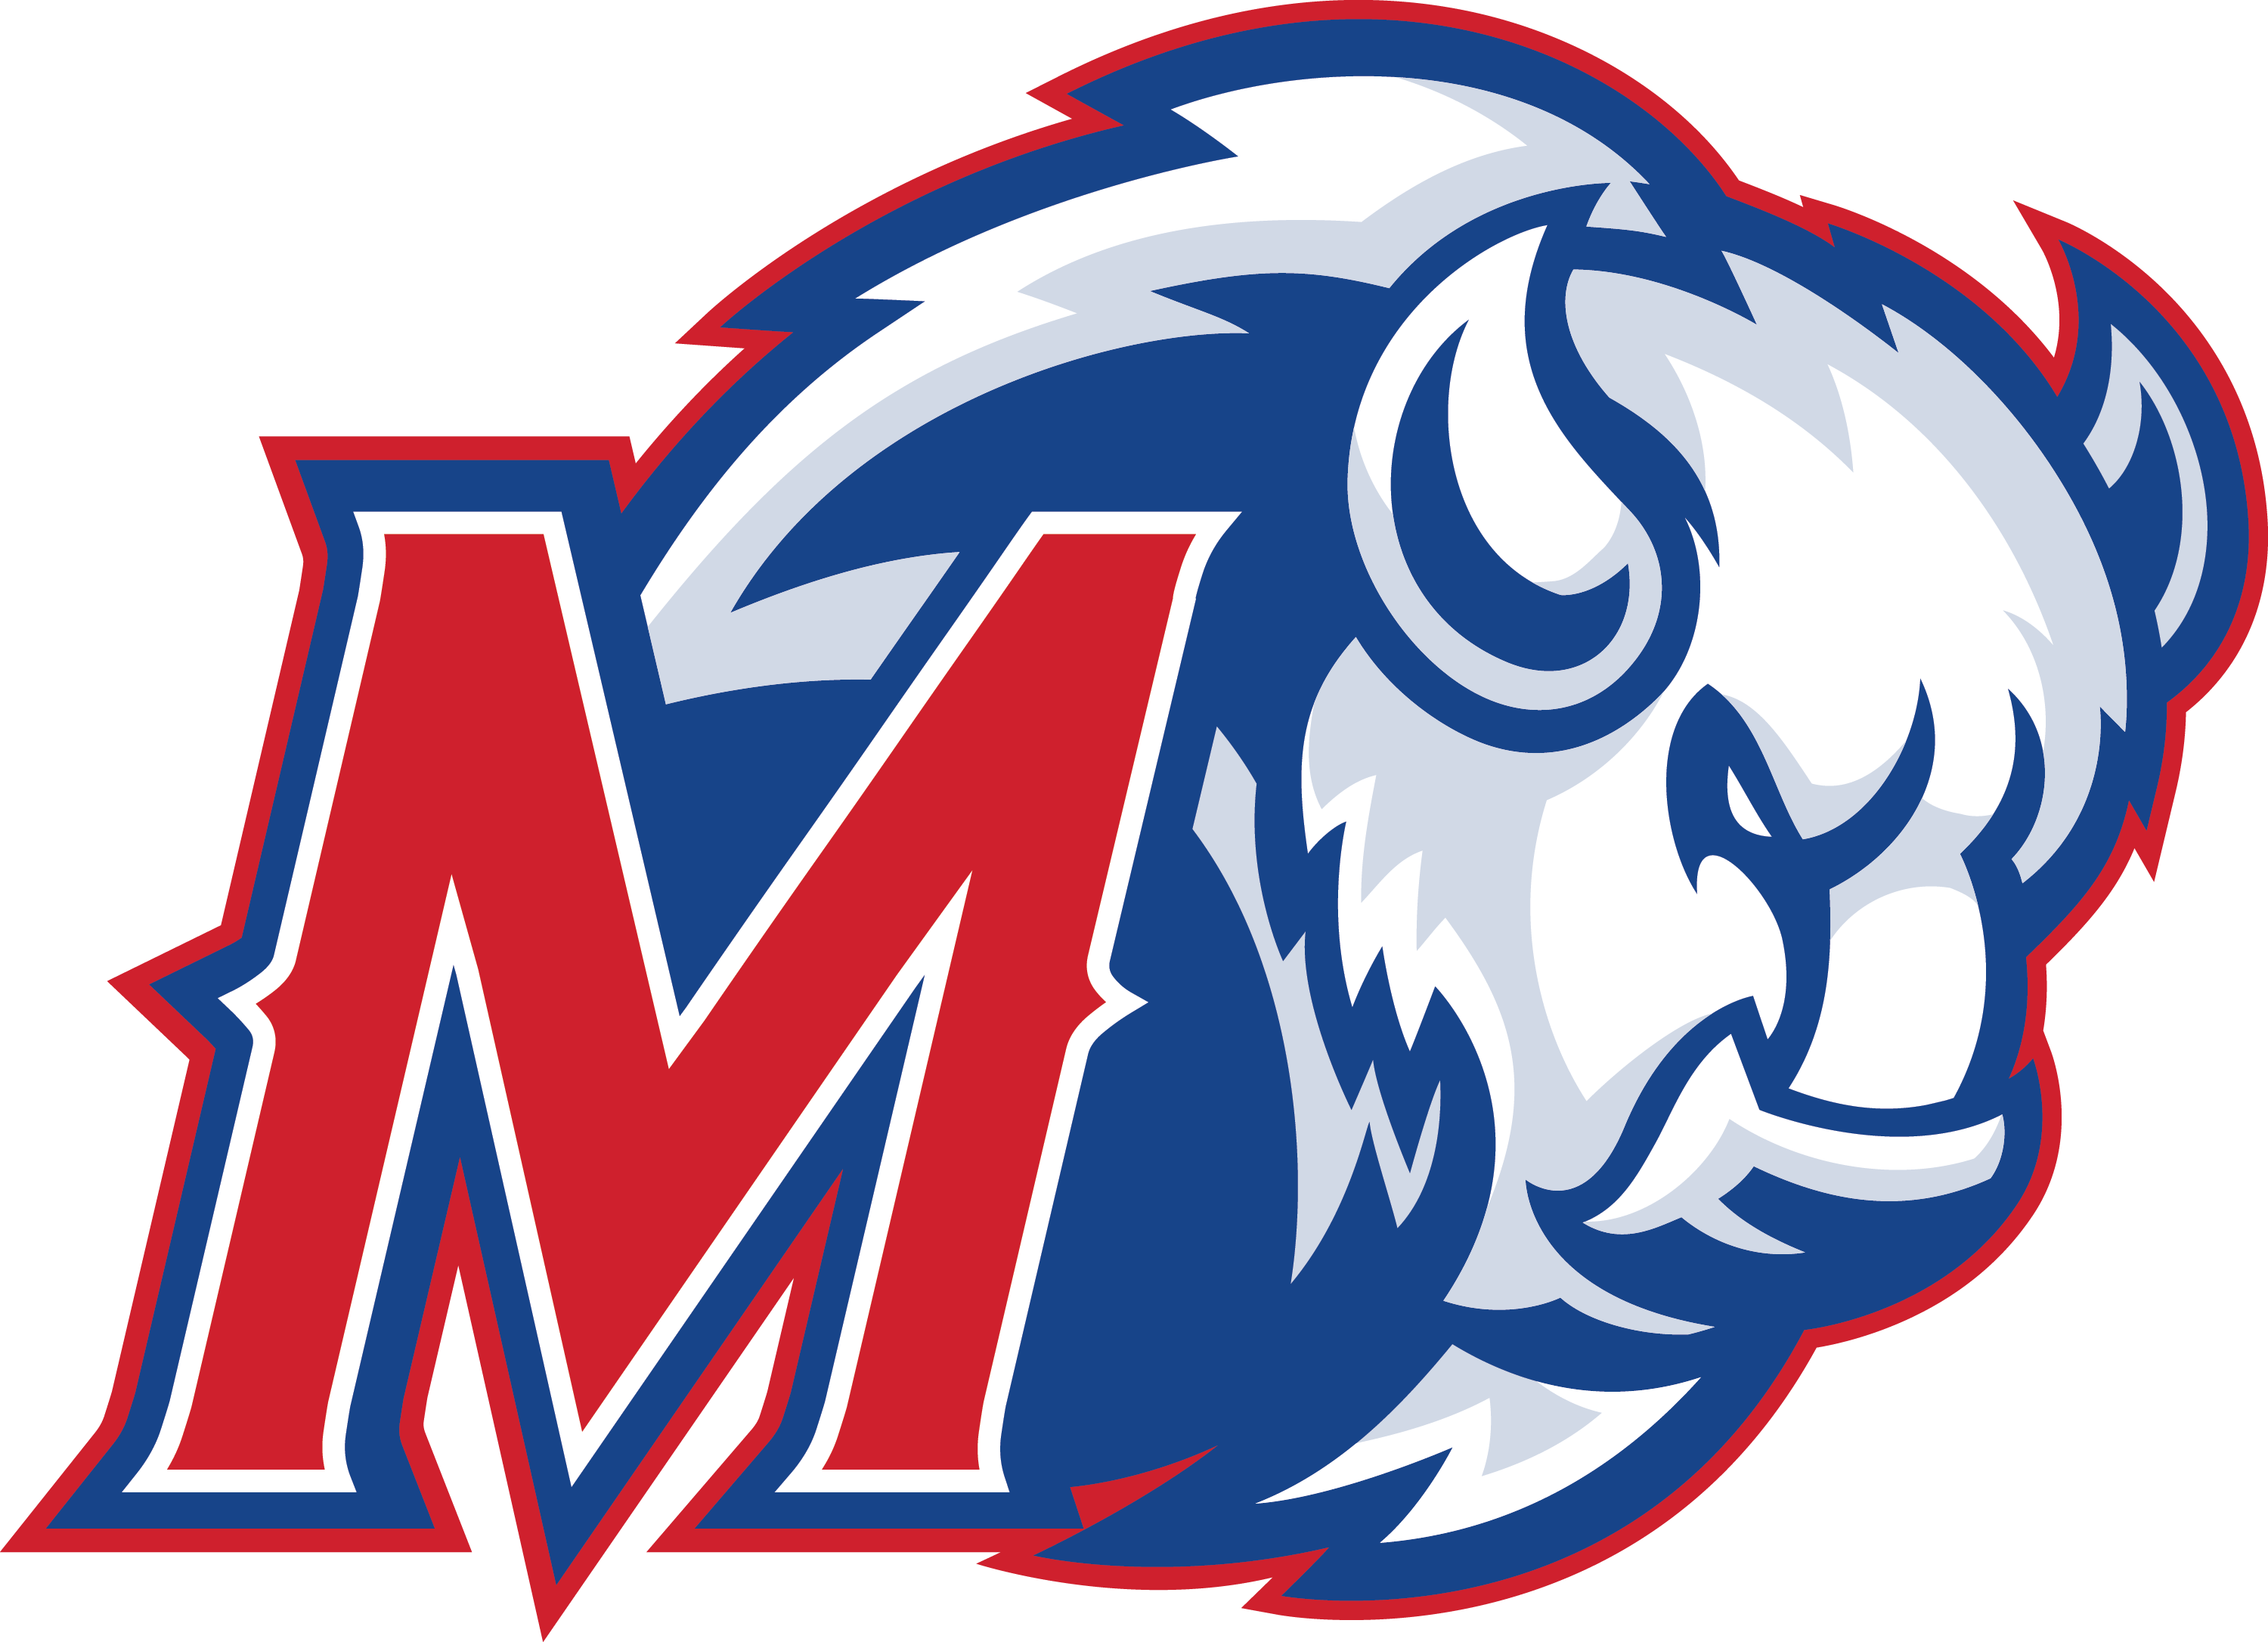 Red and Blue in High School Logo - Madras High School Update - KWSO 91.9